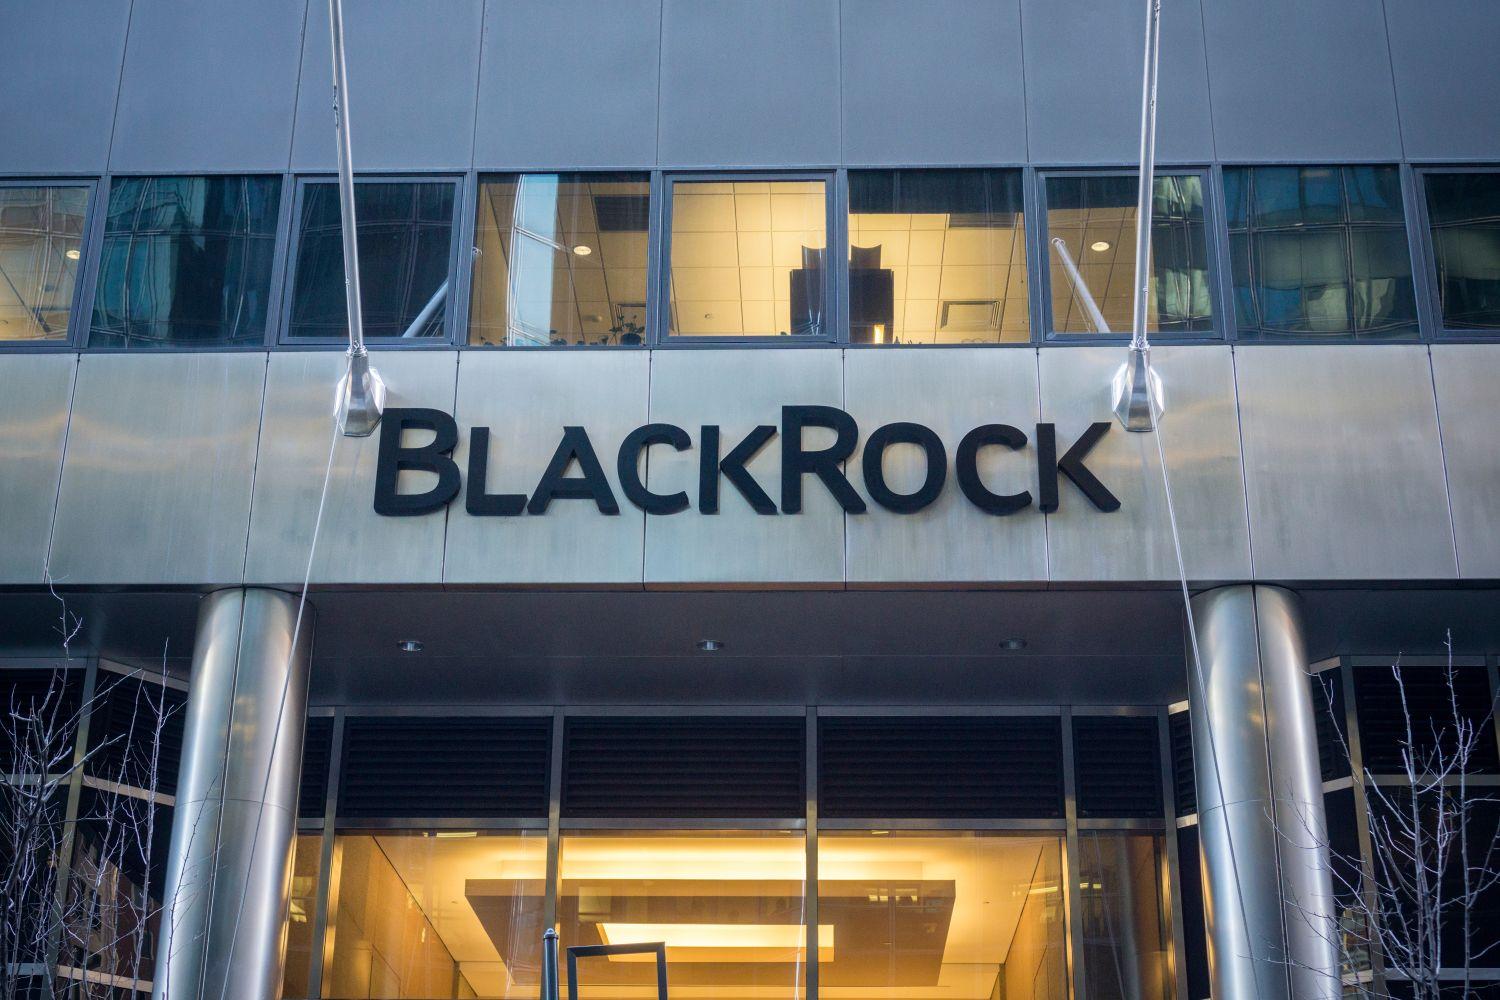 BlackRock, the largest investment firm in the world, filed for Bitcoin ETF